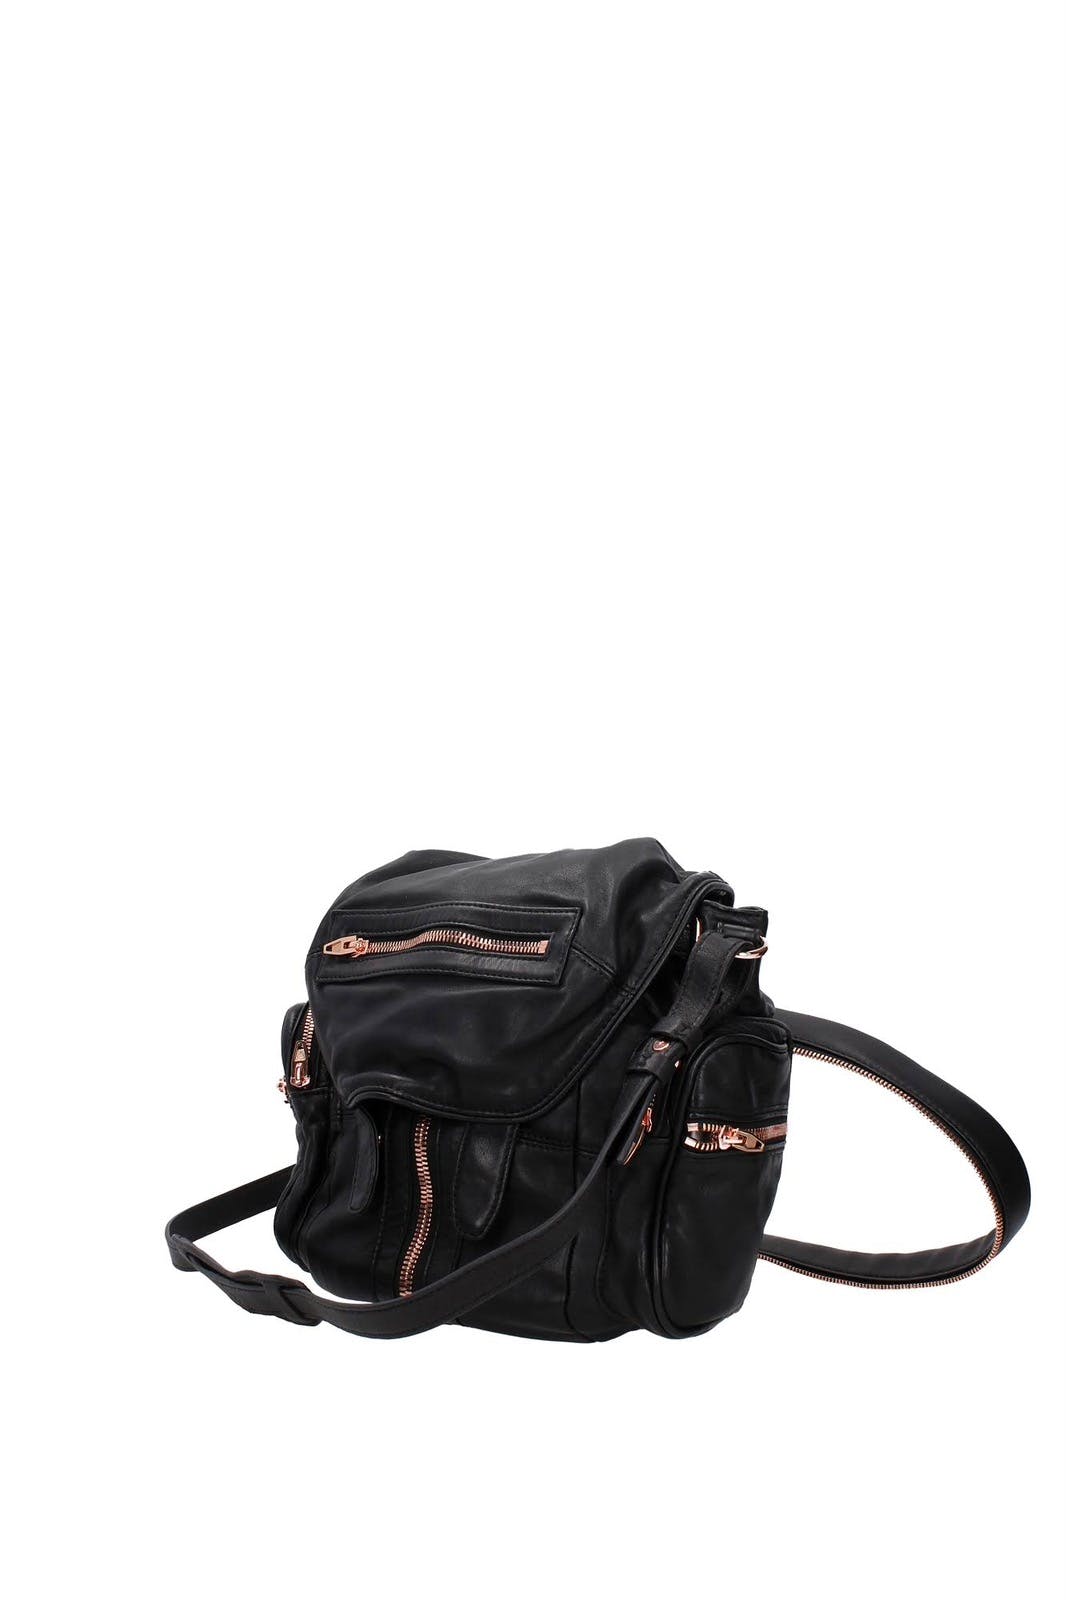 Authentic Alexander Wang Marti Leather Backpack - 7